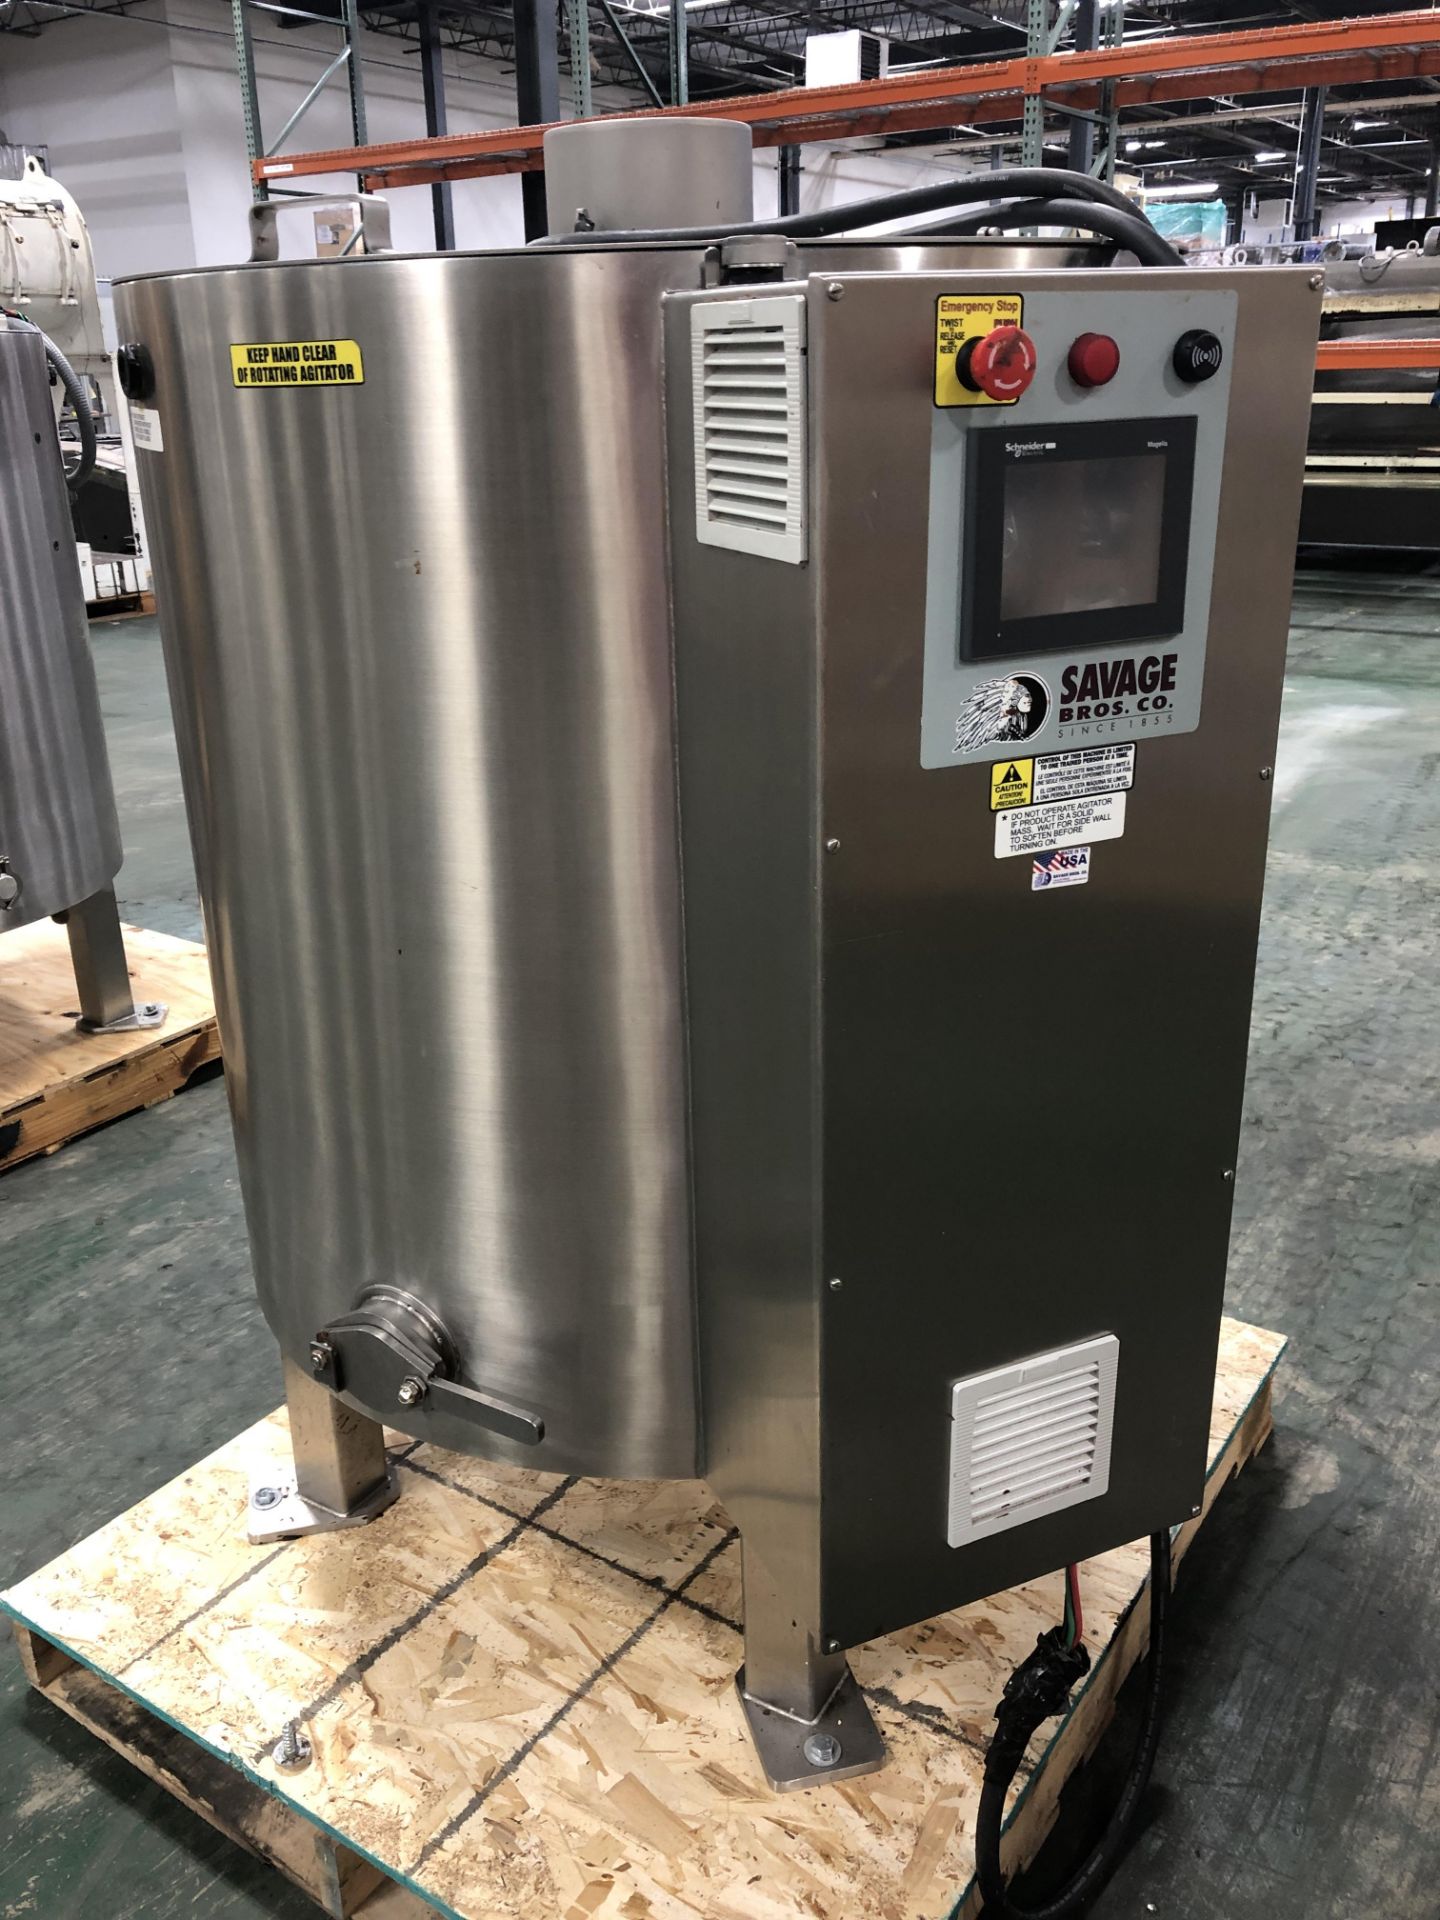 Savage Stainless Steel 1250-lb Chocolate Melter, model 0974-36, with PLC touchscreen